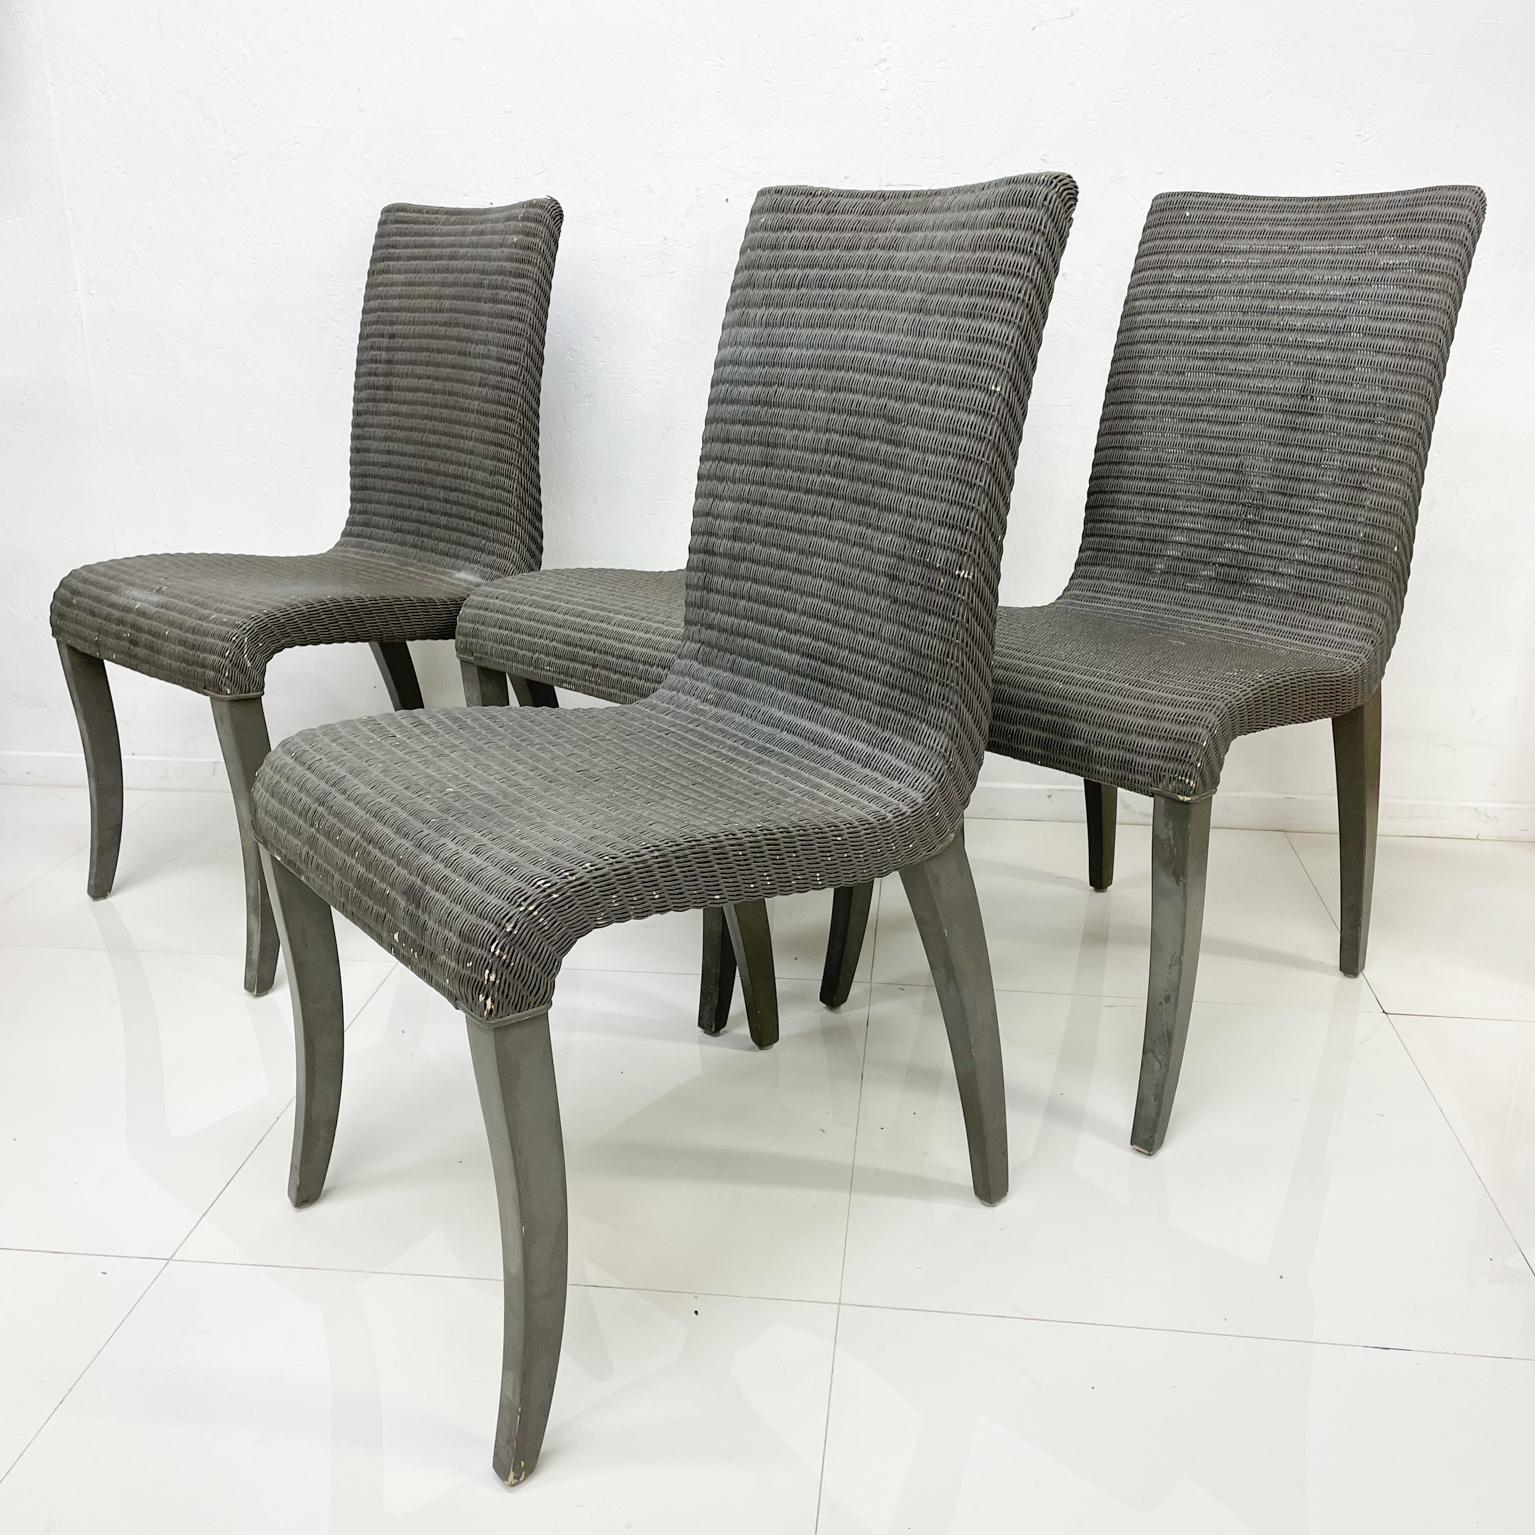 Modern Vincent Sheppard Set of Four Woven Dining Chairs Janus et Cie Lloyd Loom